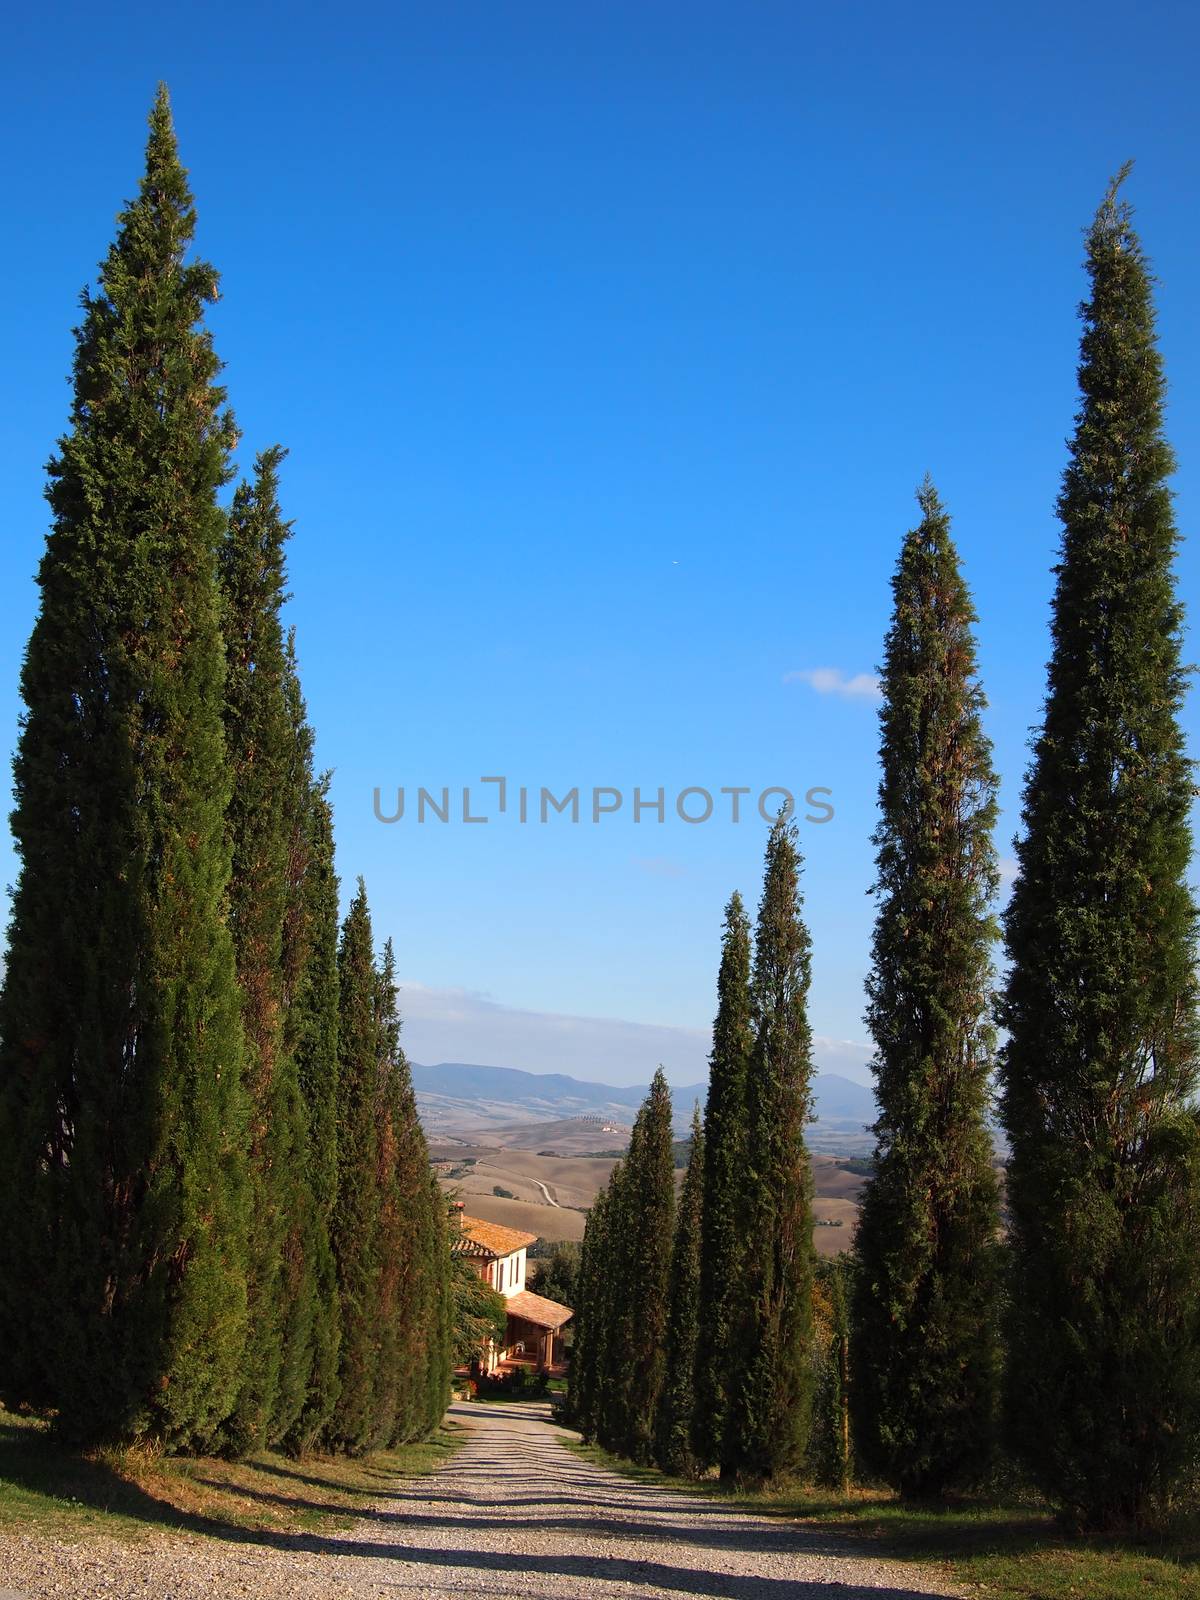 Italian access route lined by cypress trees with Tuscany background.